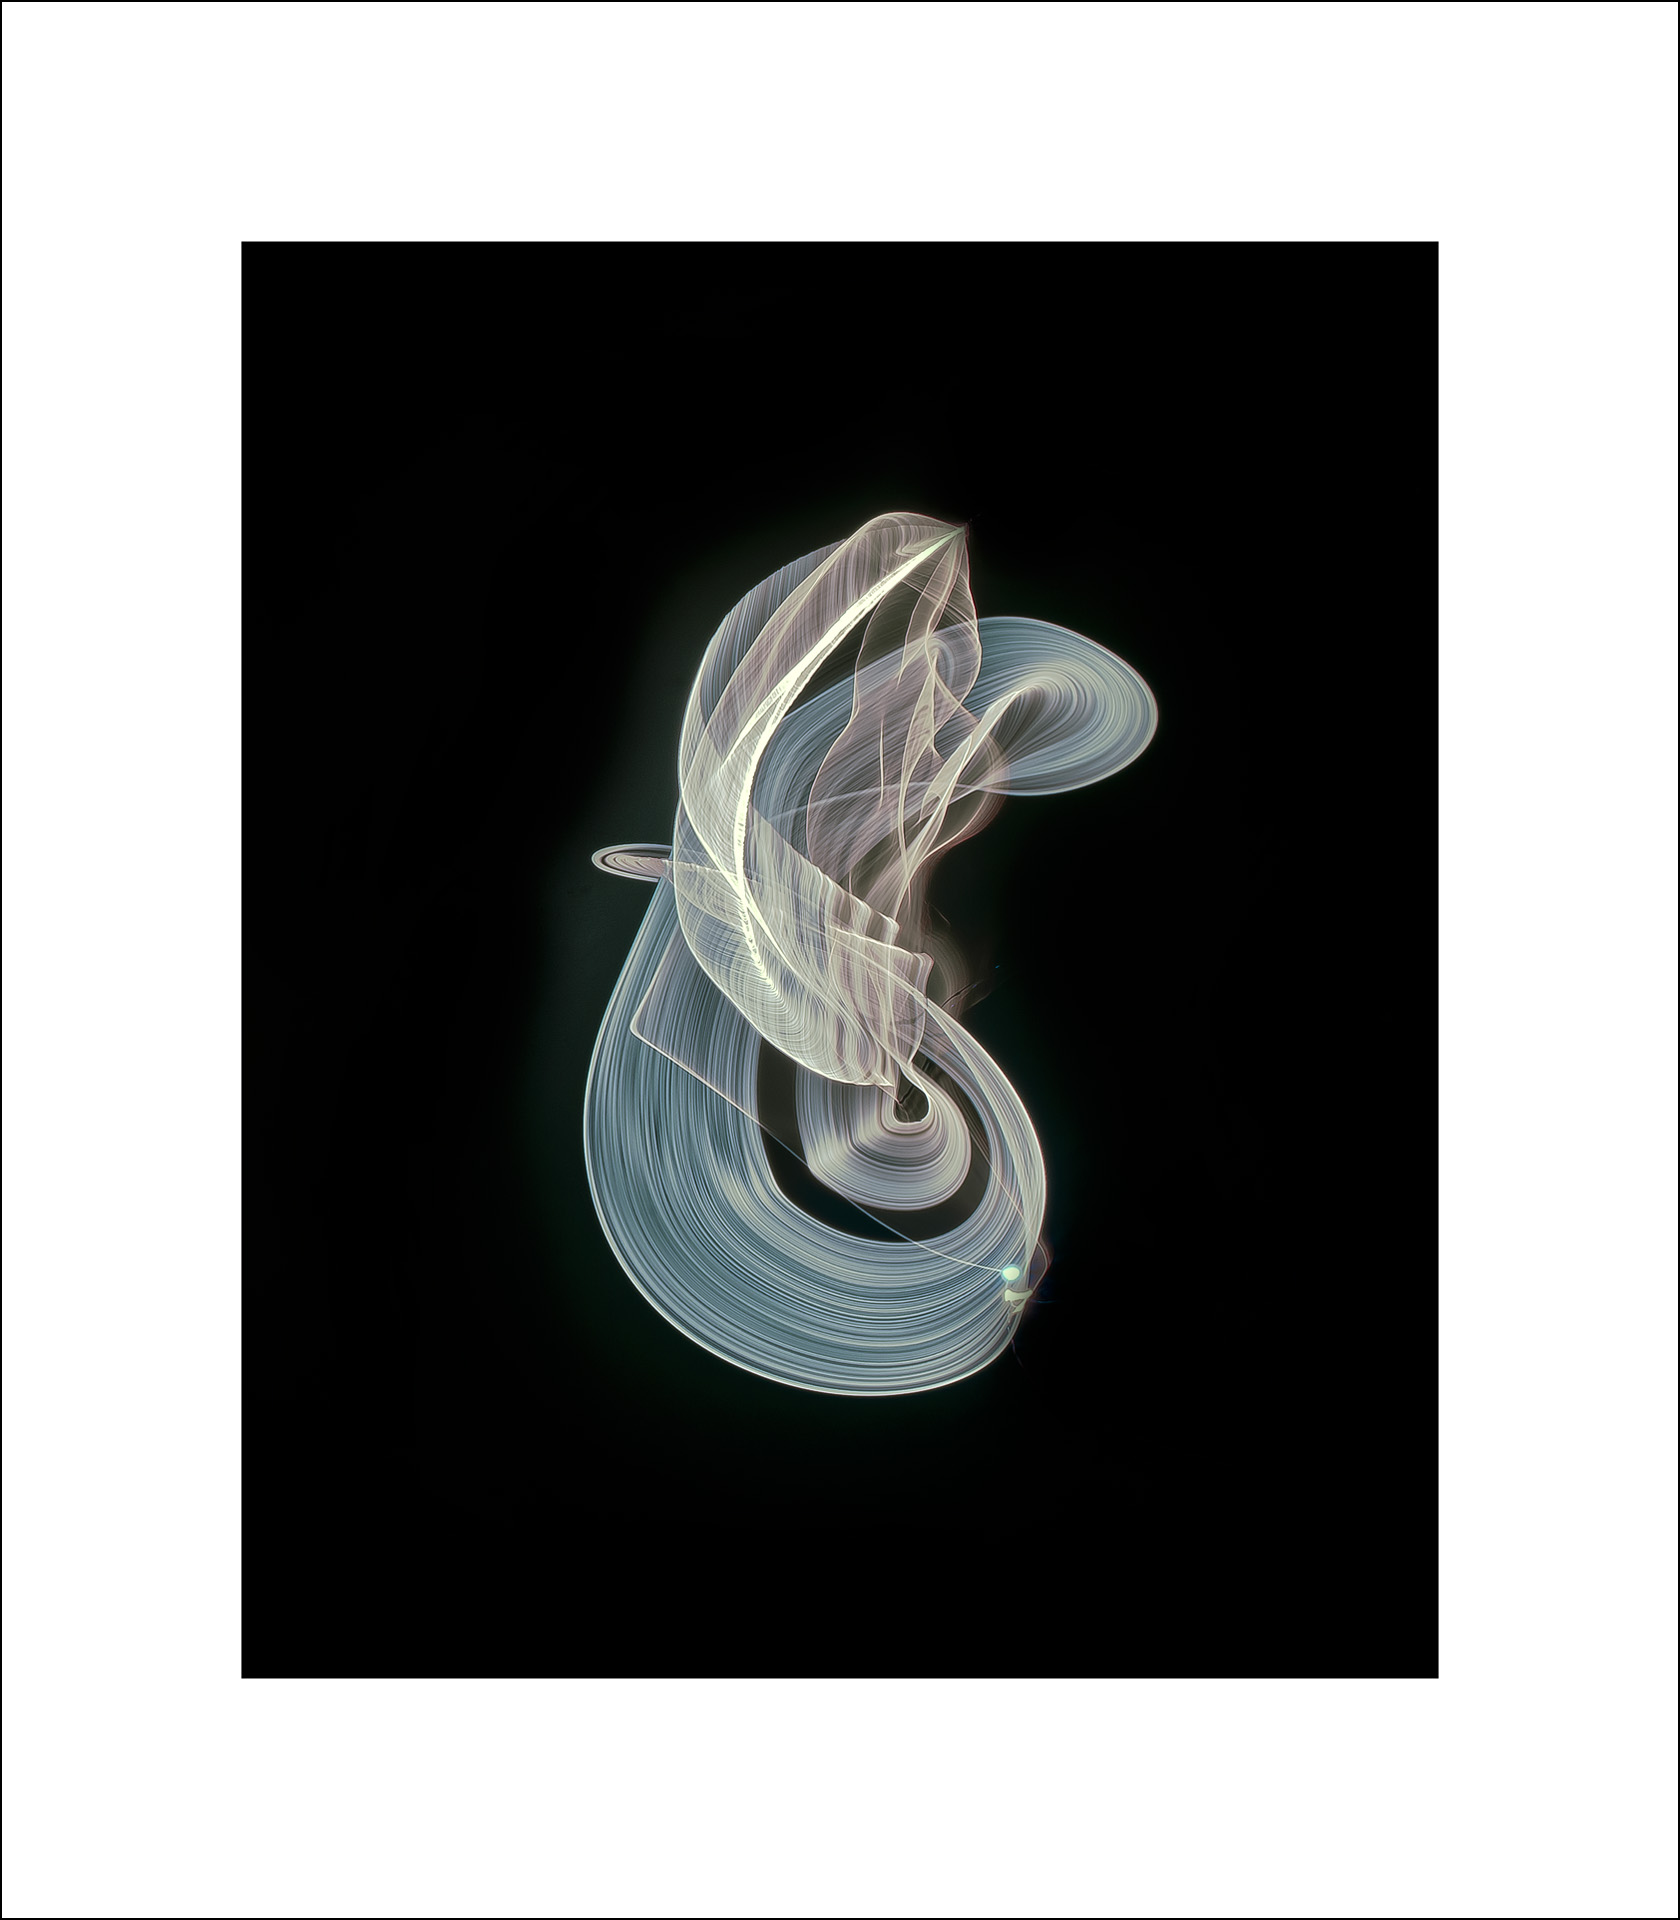 ABSTRACT PHOTOGRAPHY, BLACK PHOTOGRAPHY, MODERN FINE ART GICLEE PRINTS